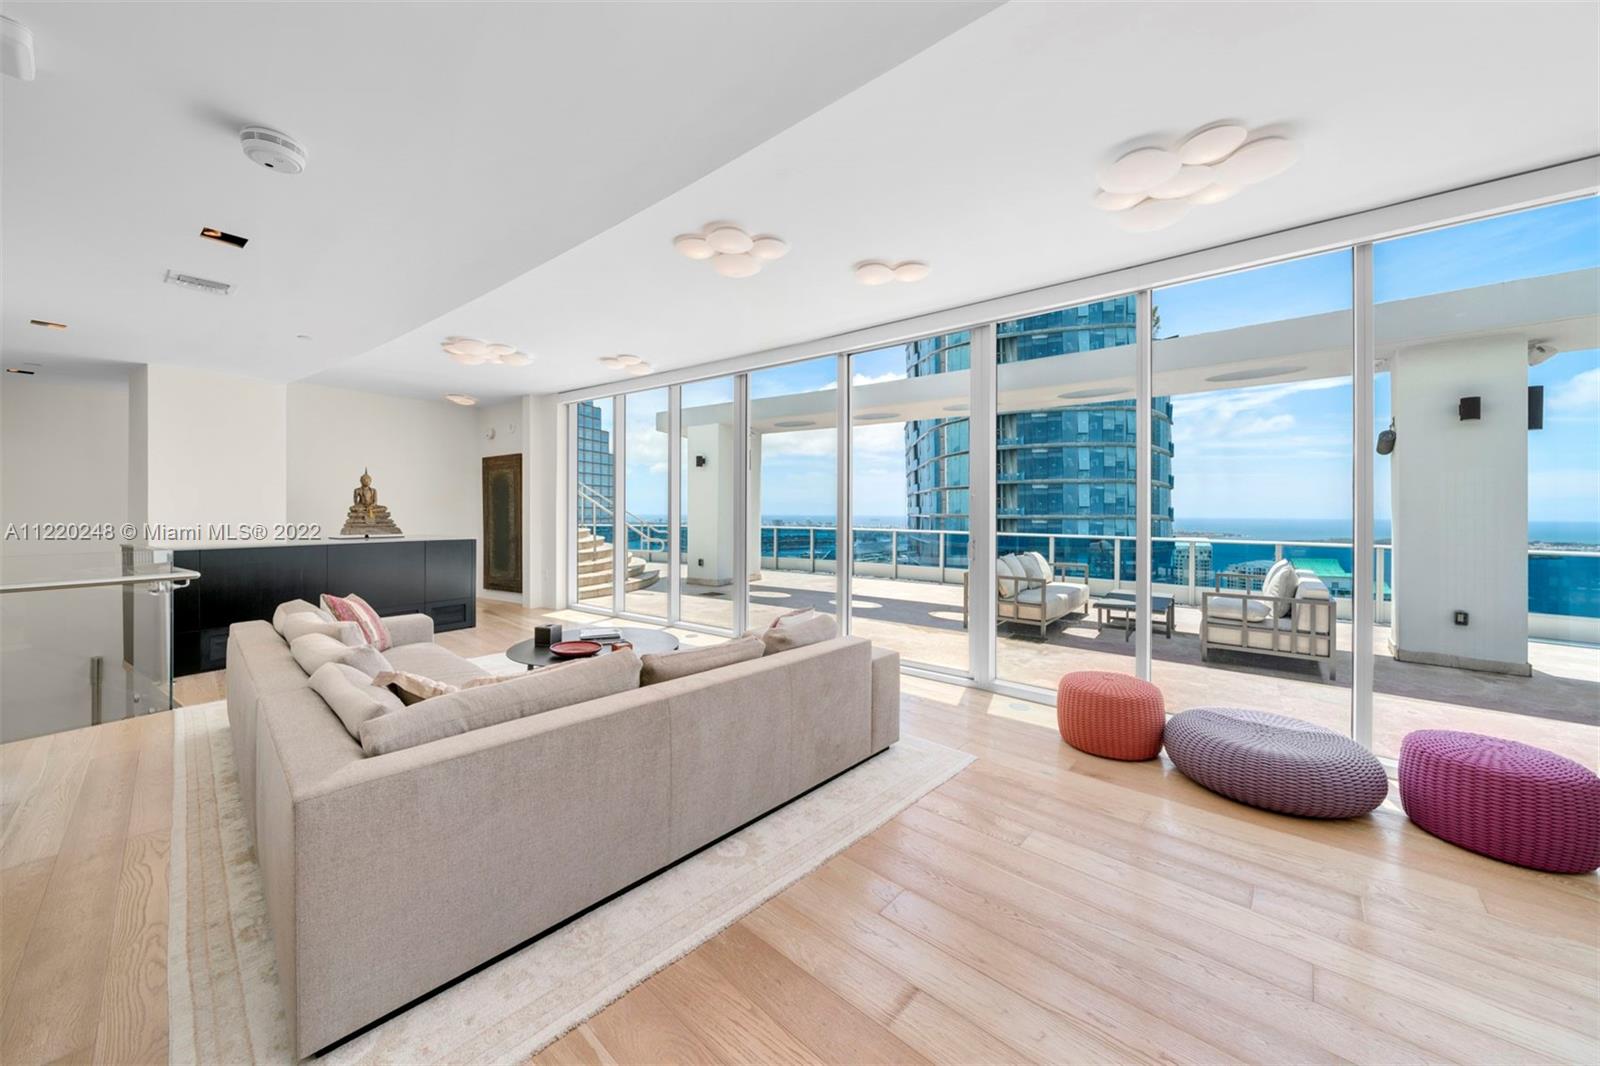 One of a kind 2-story trophy Penthouse in Epic Miami. Perched 54 floors high, enjoy sweeping views of Biscayne Bay, the port of Miami & downtown throughout this contemporary masterpiece. Ideal for indoor & outdoor living with 3,000 sf of expansive terraces, including a top floor entertainment area overlooking your private rooftop jacuzzi. This artfully designed PH boasts 4,310 SF of luxurious finishes with 3 beds/4.5 baths easily convertible to a 4th bedroom. Features include a floating illuminated staircase, open chef’s kitchen, custom closets/doors, & smart home system. Primary suite w/spa-like marble bath, soaking tub, & oversized shower overlooking the bay. Indulge in full-service resident/hotel amenities including multiple pools, gym, spa, concierge, and acclaimed restaurant, Zuma.